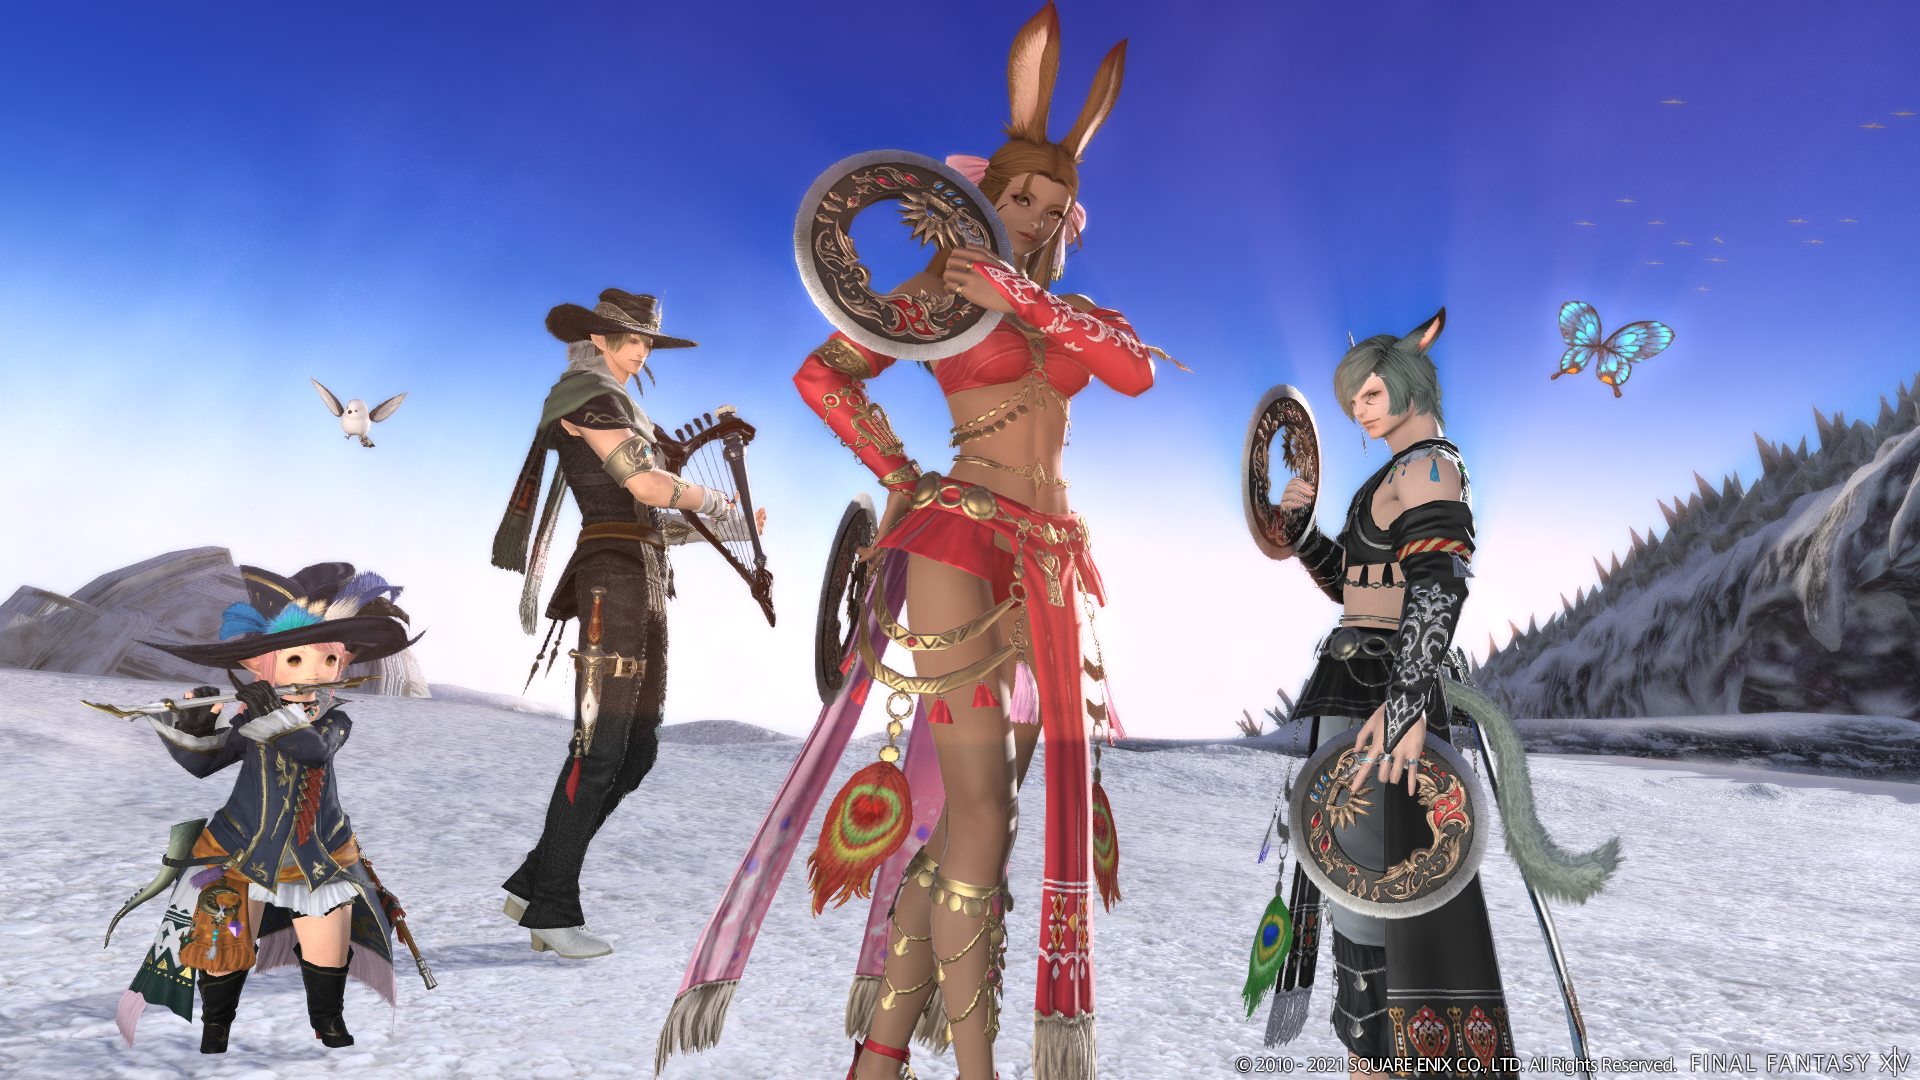 Four different Final Fantasy characters stand on a snowy field with their weapons drawn